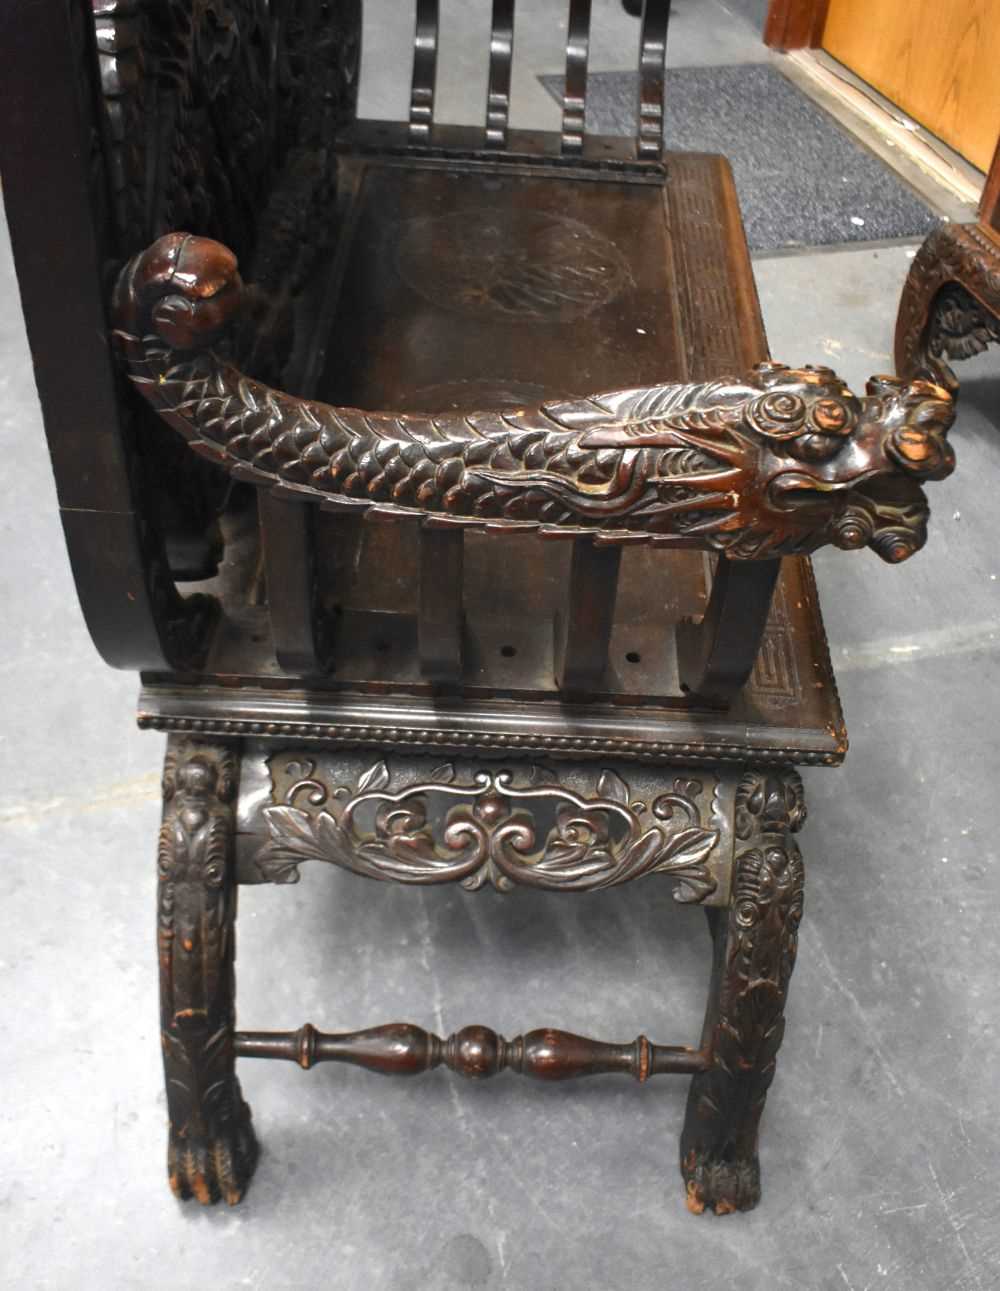 A LARGE 19TH CENTURY JAPANESE MEIJI PERIOD CARVED WOOD DRAGON BENCH. 125 cm x 125 cm. - Image 12 of 14